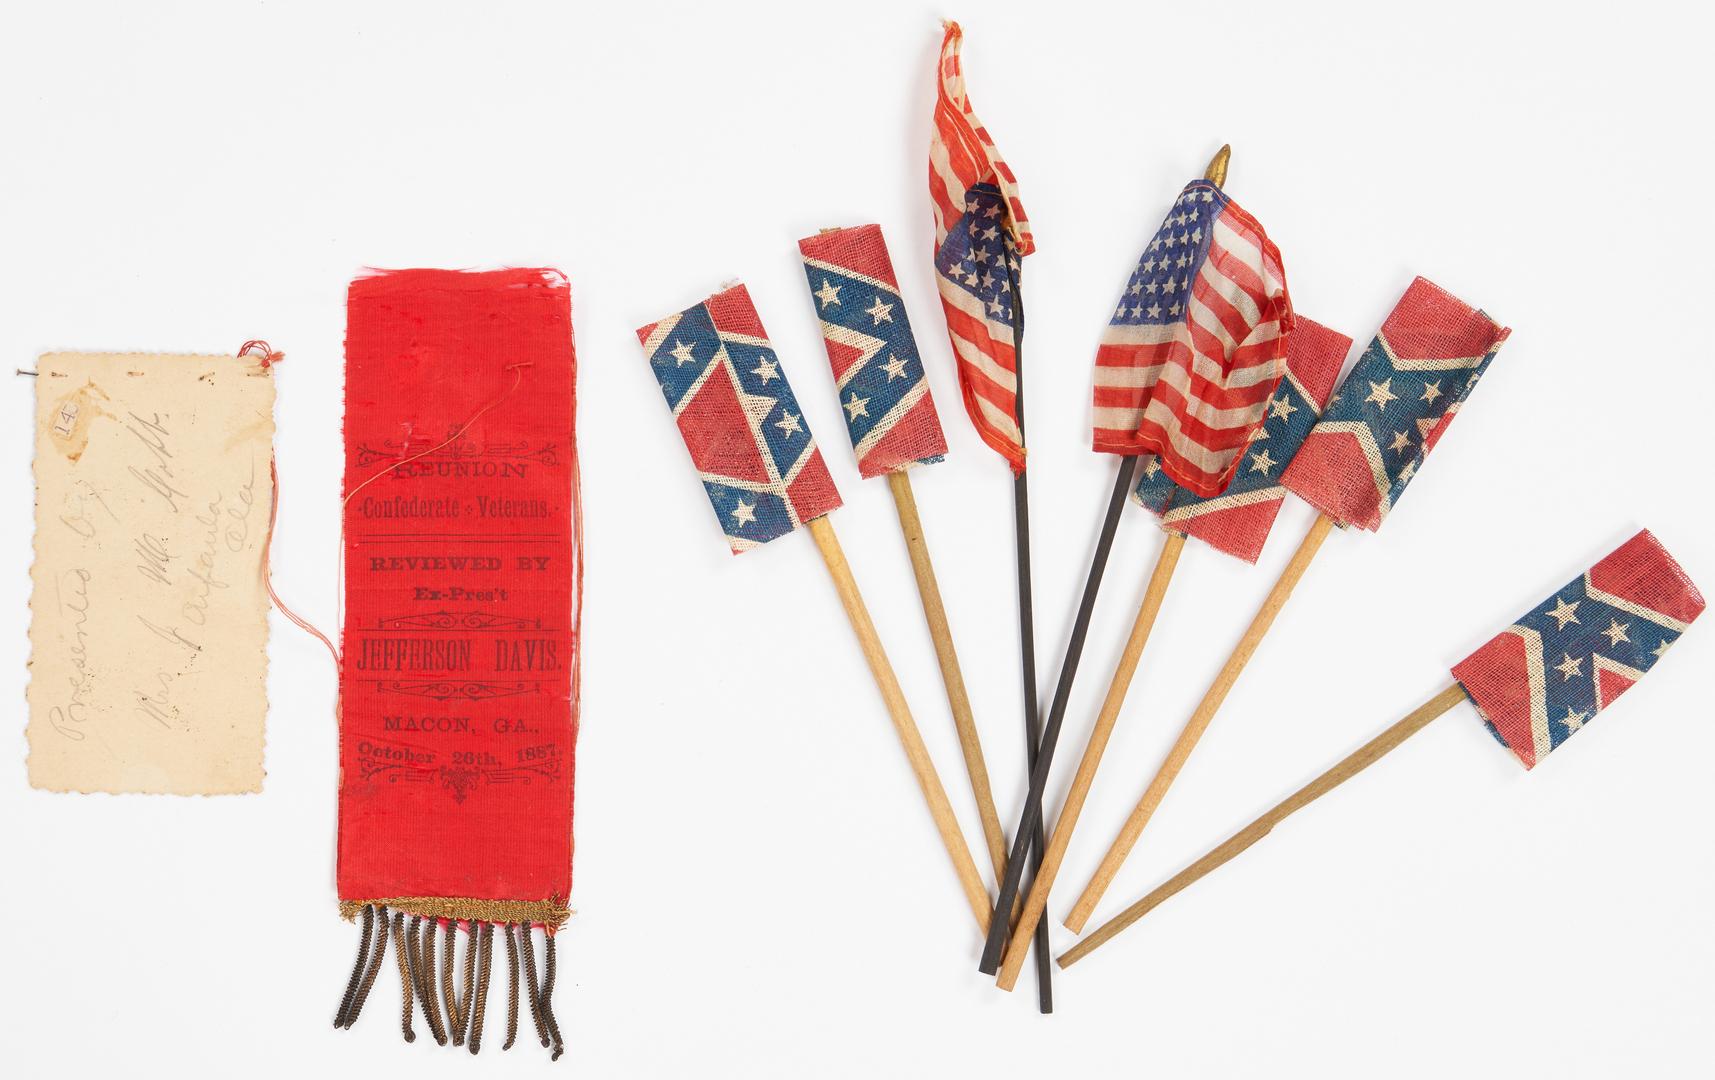 Assembled Group of 34 Civil War/U.S. Revolution Related Items - Image 7 of 25